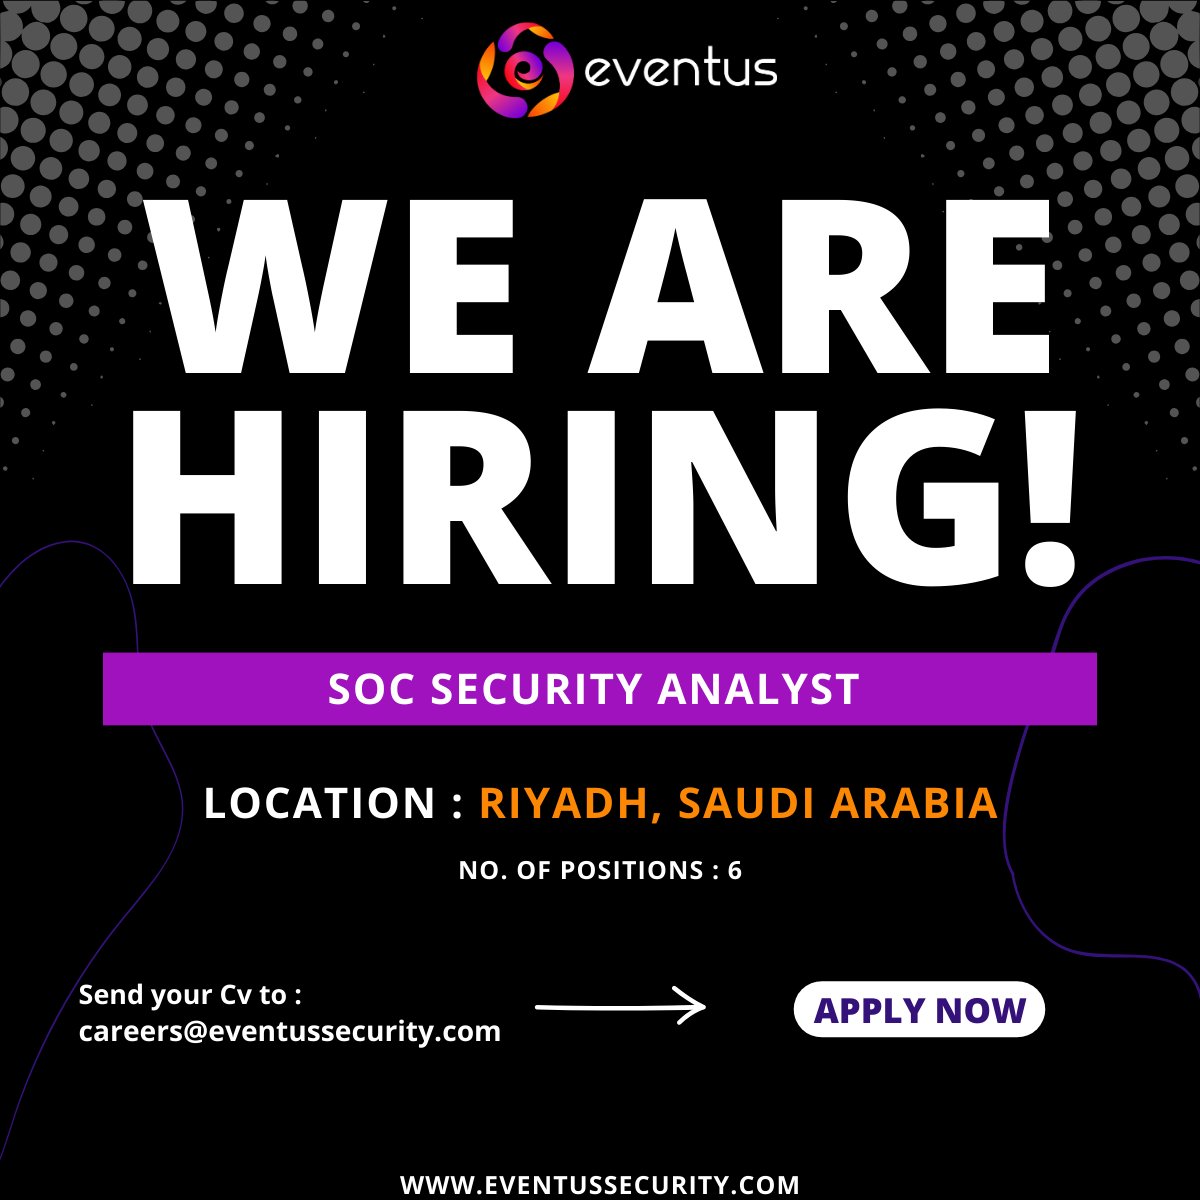 Passionate about #CyberSecurity? Join Eventus in Riyadh, Saudi Arabia, and be part of our growth

🌟Position: Security Analyst
🌐Location: Riyadh, Saudi Arabia
👥Total Vacancies: 6

Apply Now➡️careers@eventussecurity.com
#EventusSecurity #NowHiring #RiyadhJobs #SecurityAnalyst